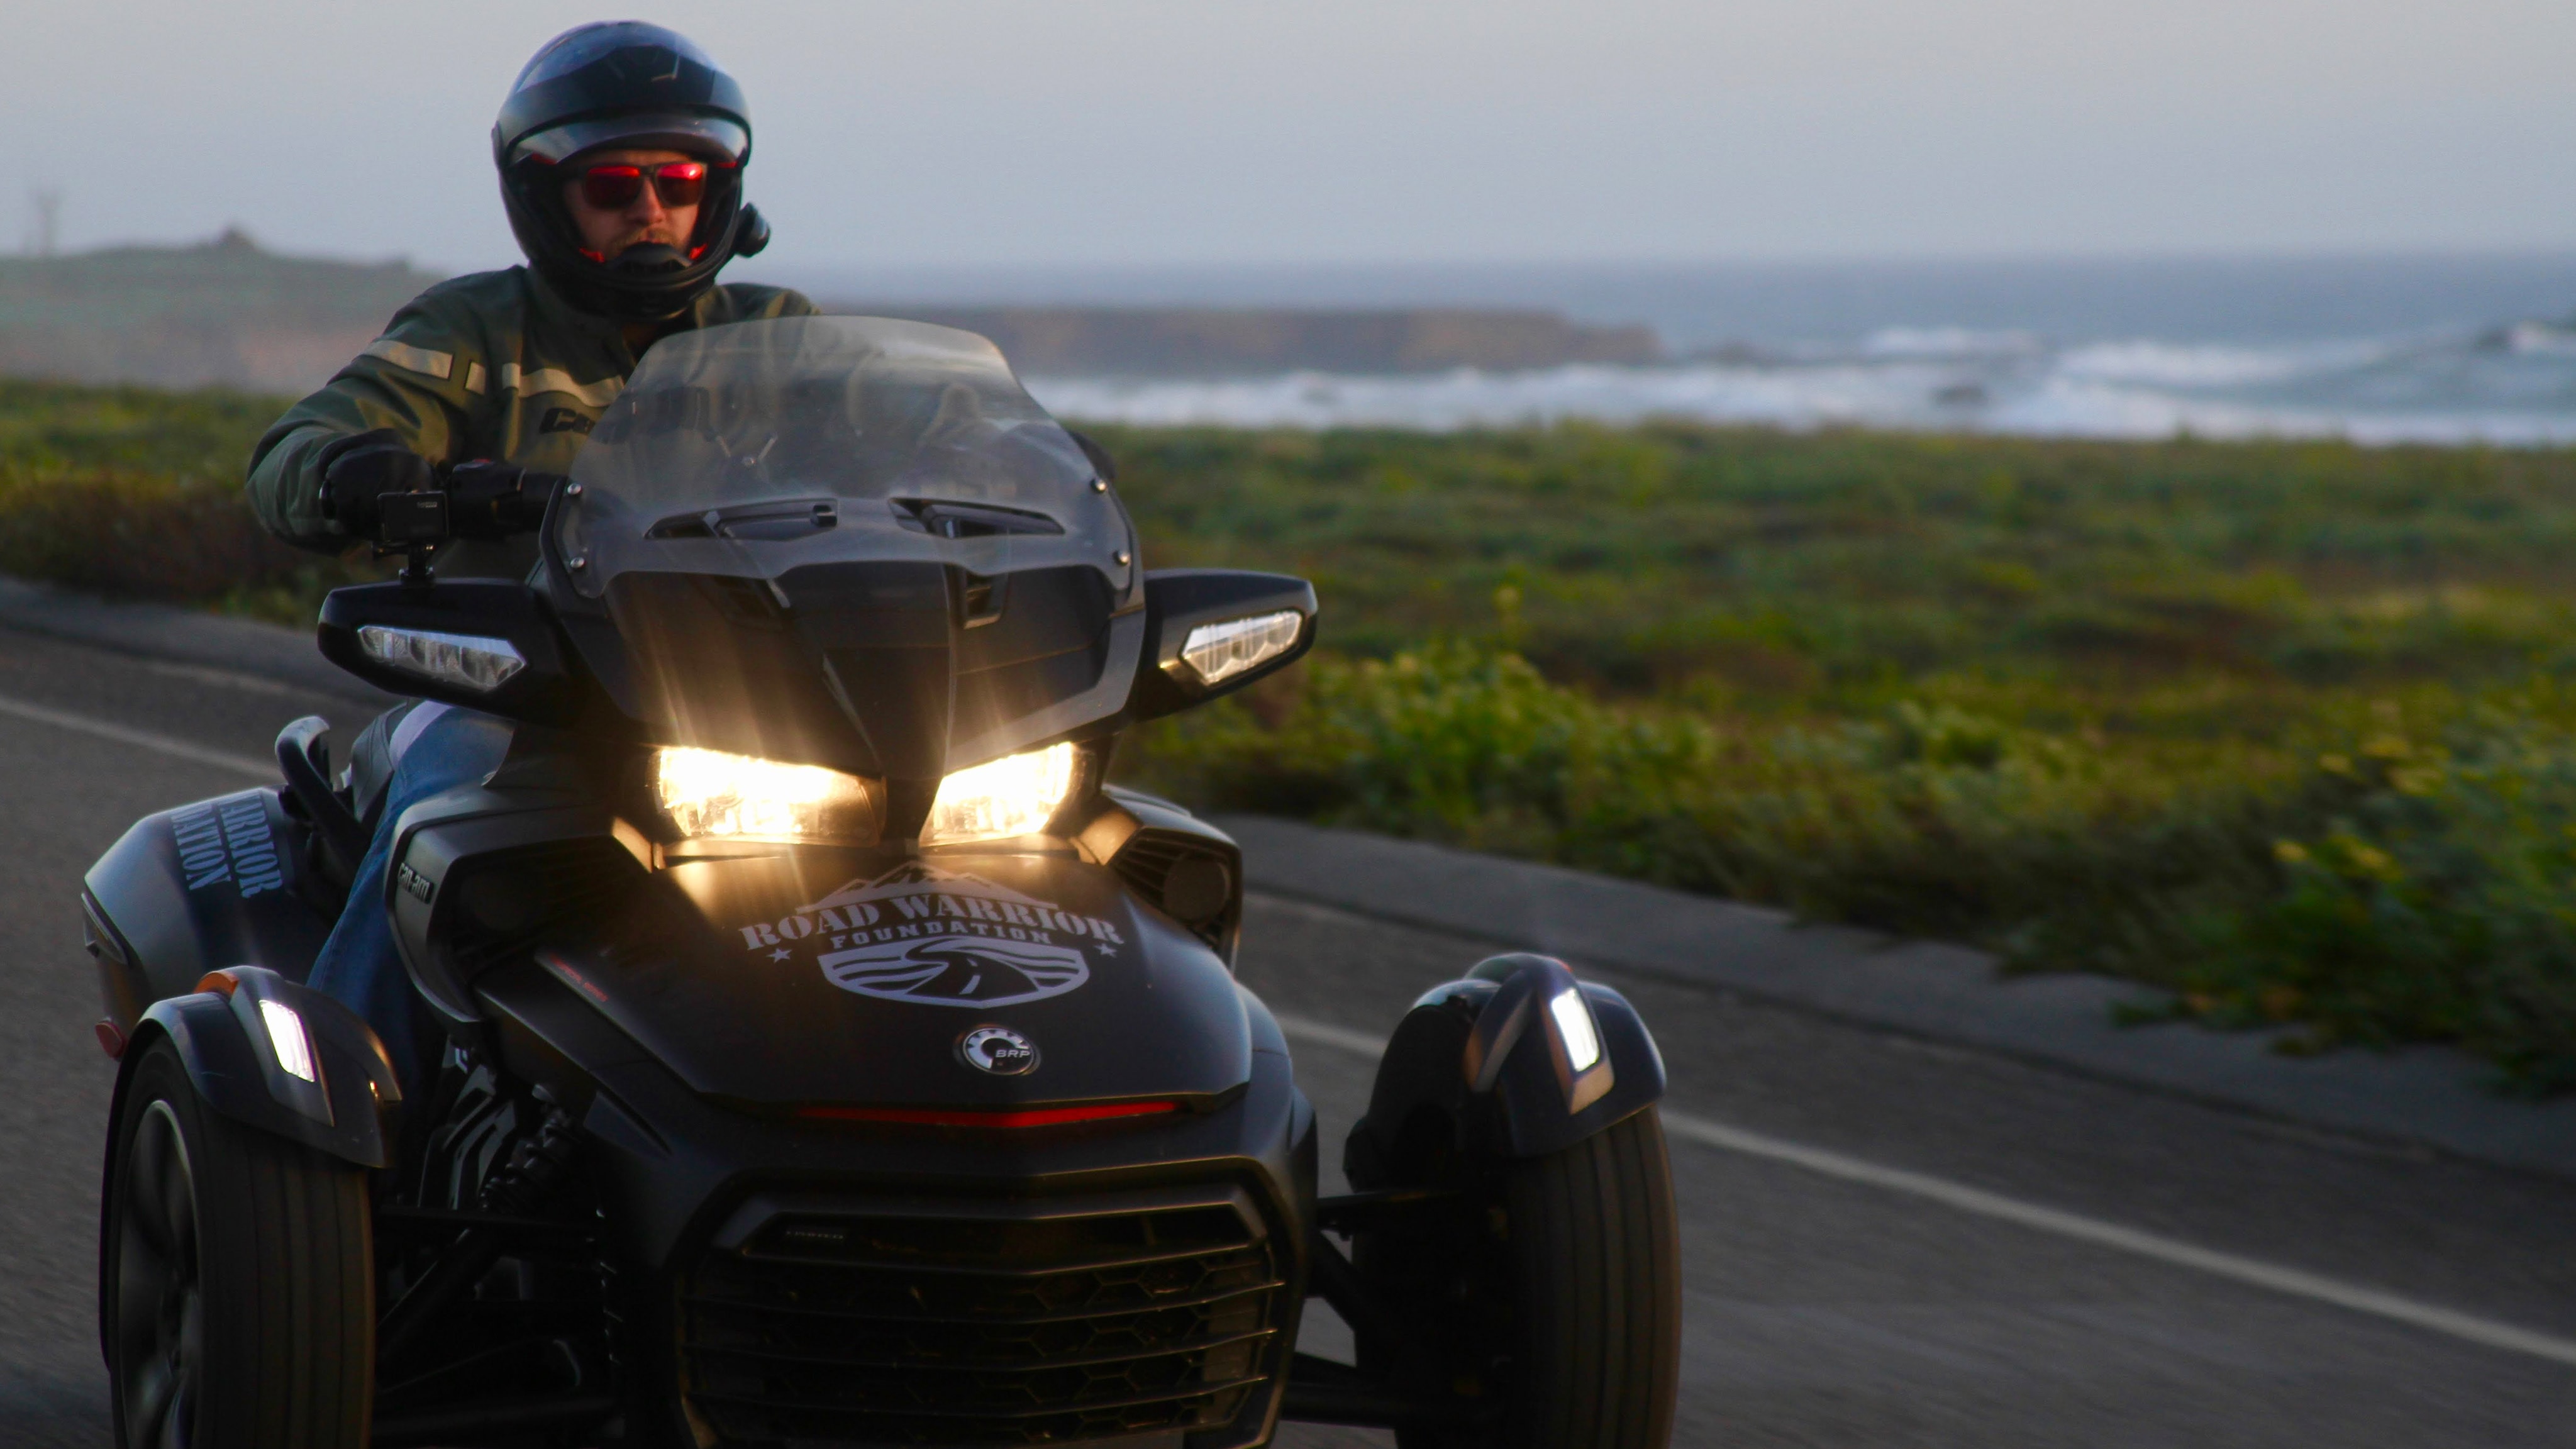 Kendell Madden riding on his Can-Am Spyder